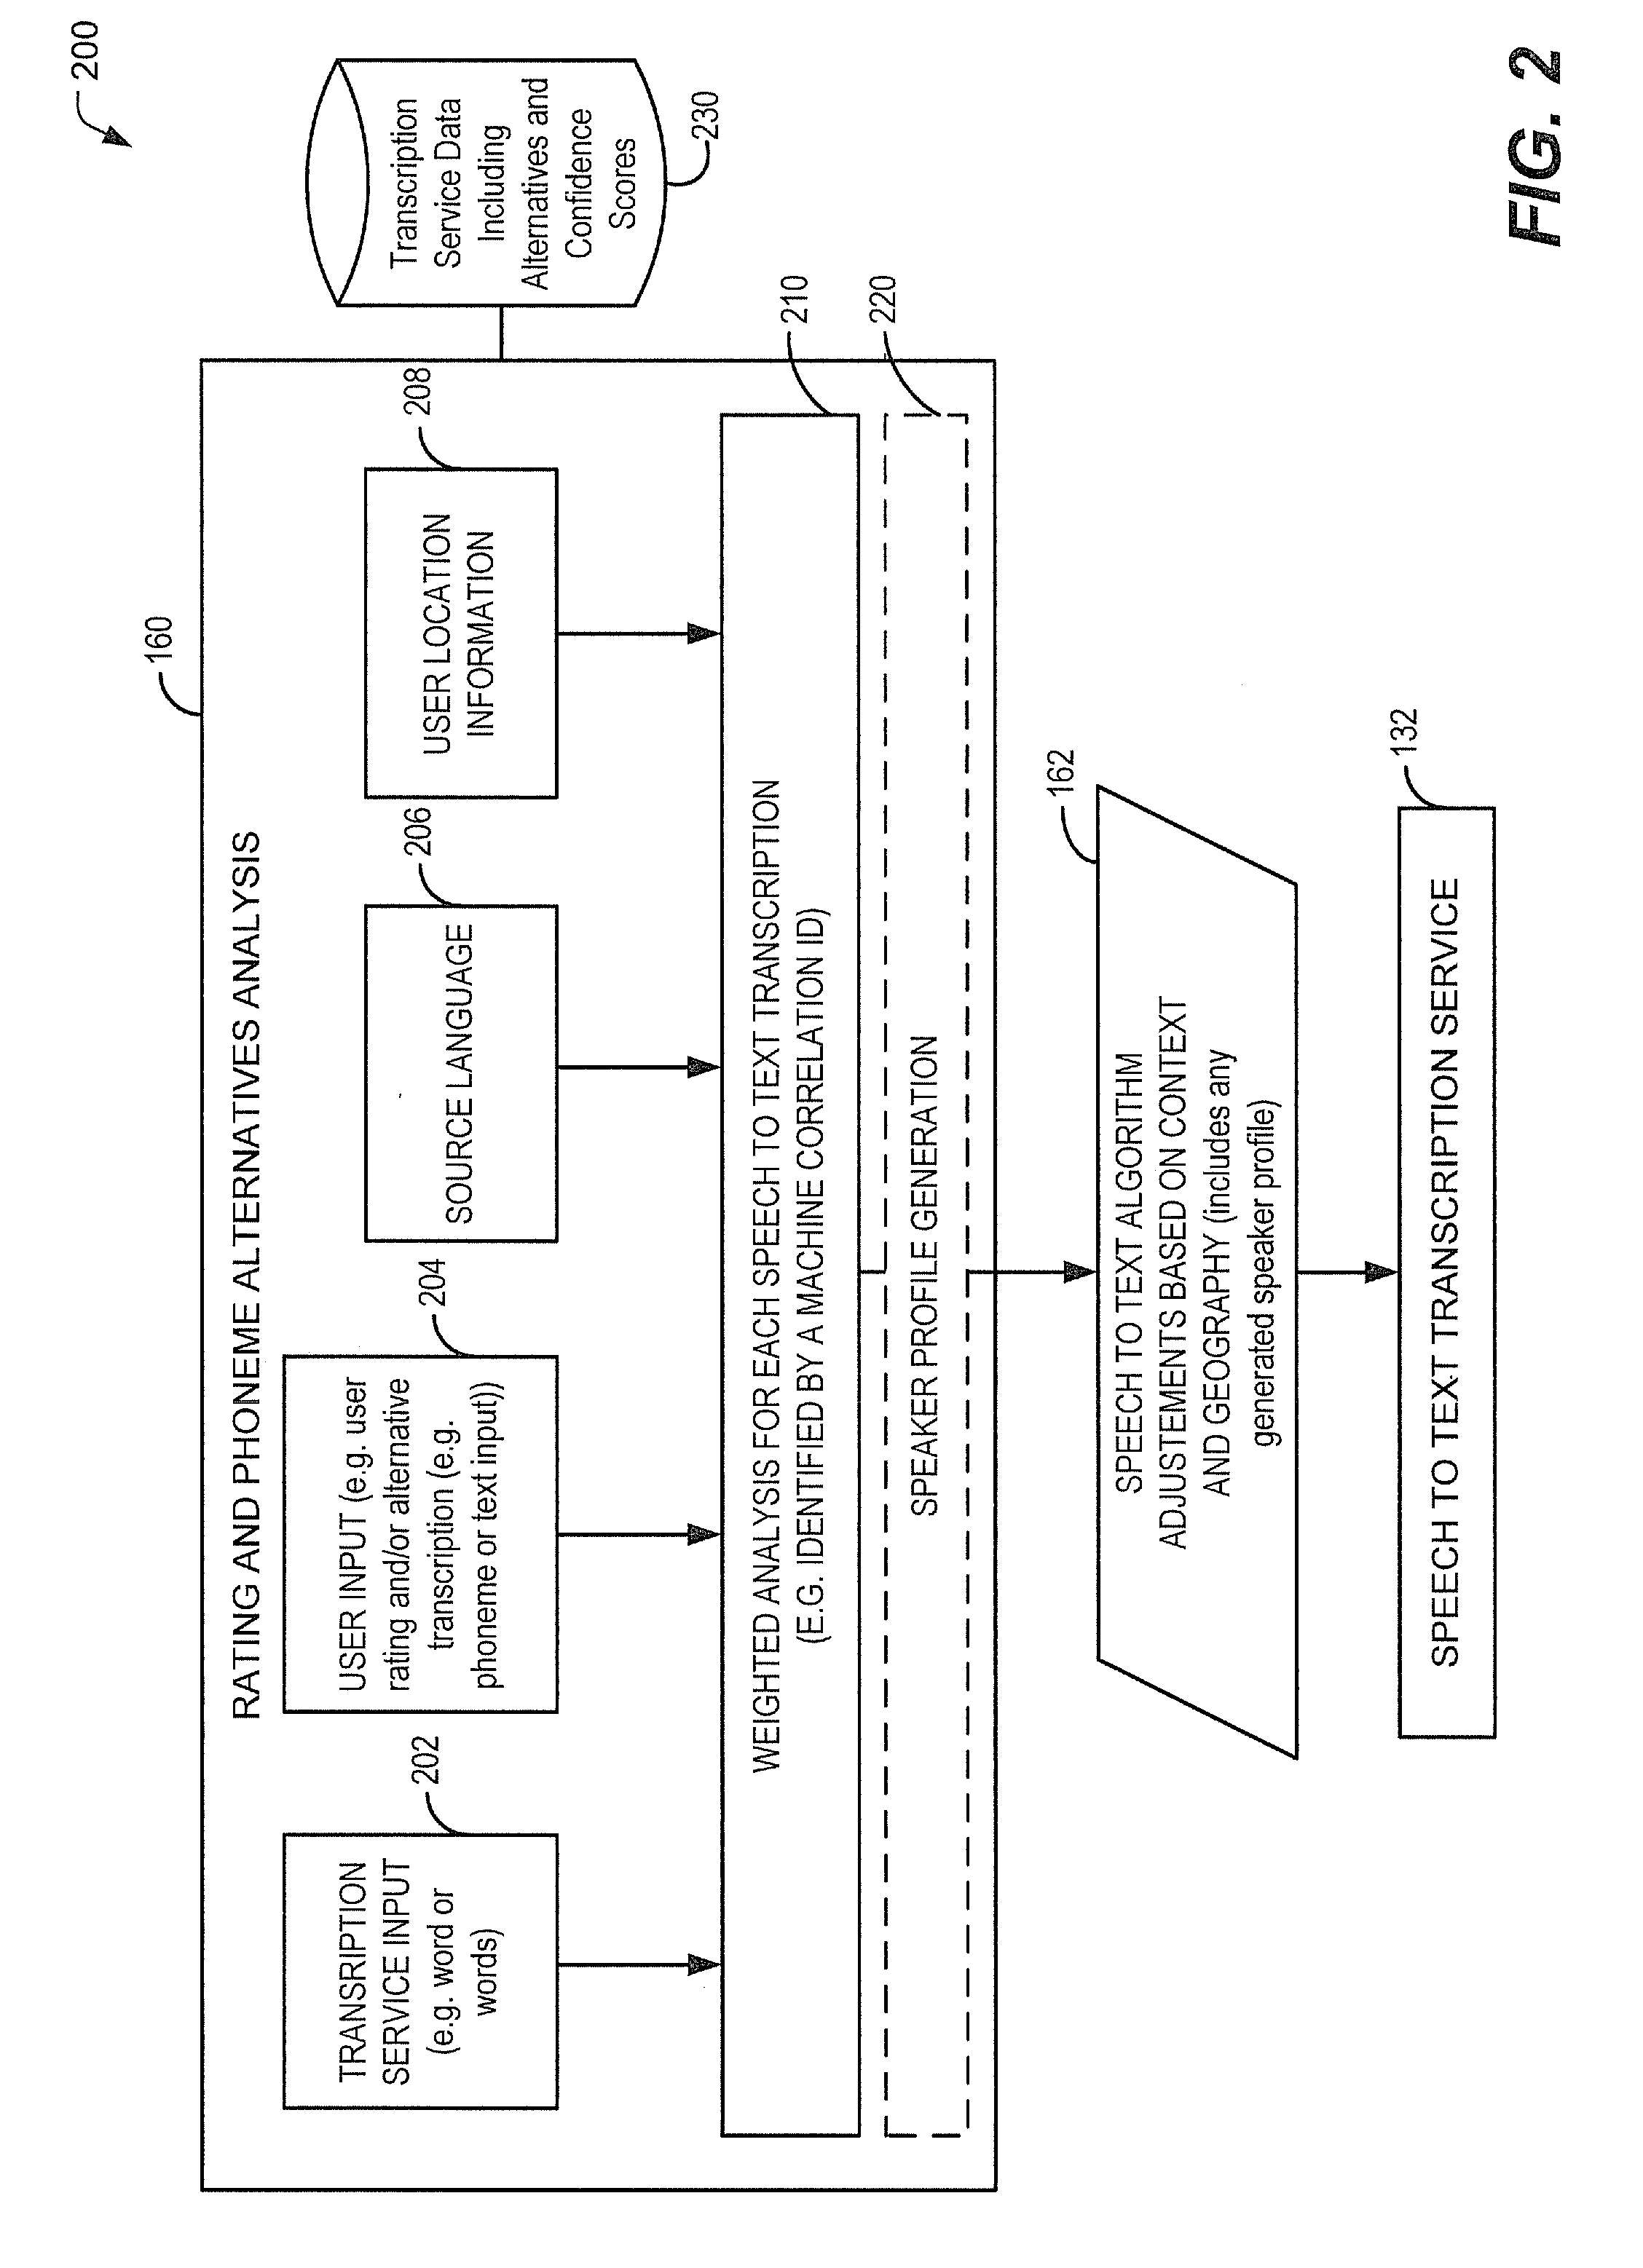 Distributed user input to text generated by a speech to text transcription service